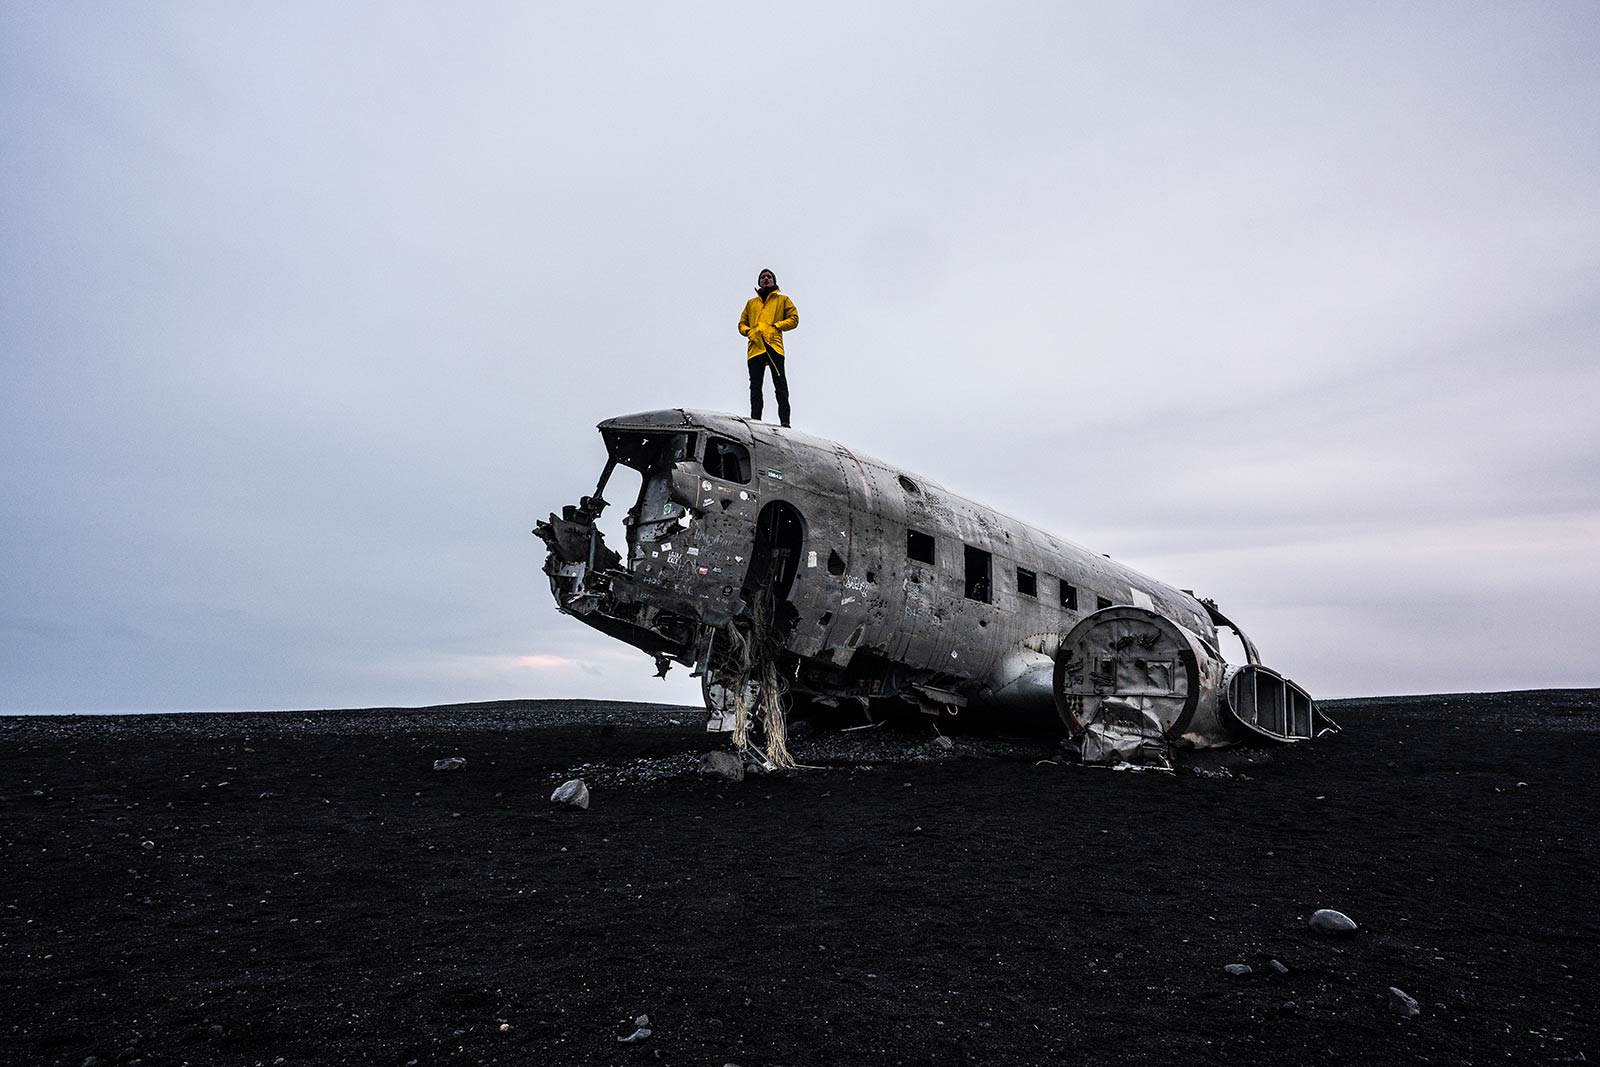 David Simpson on top of Sólheimasandur Plane Wreck in Iceland. From one paradise to another